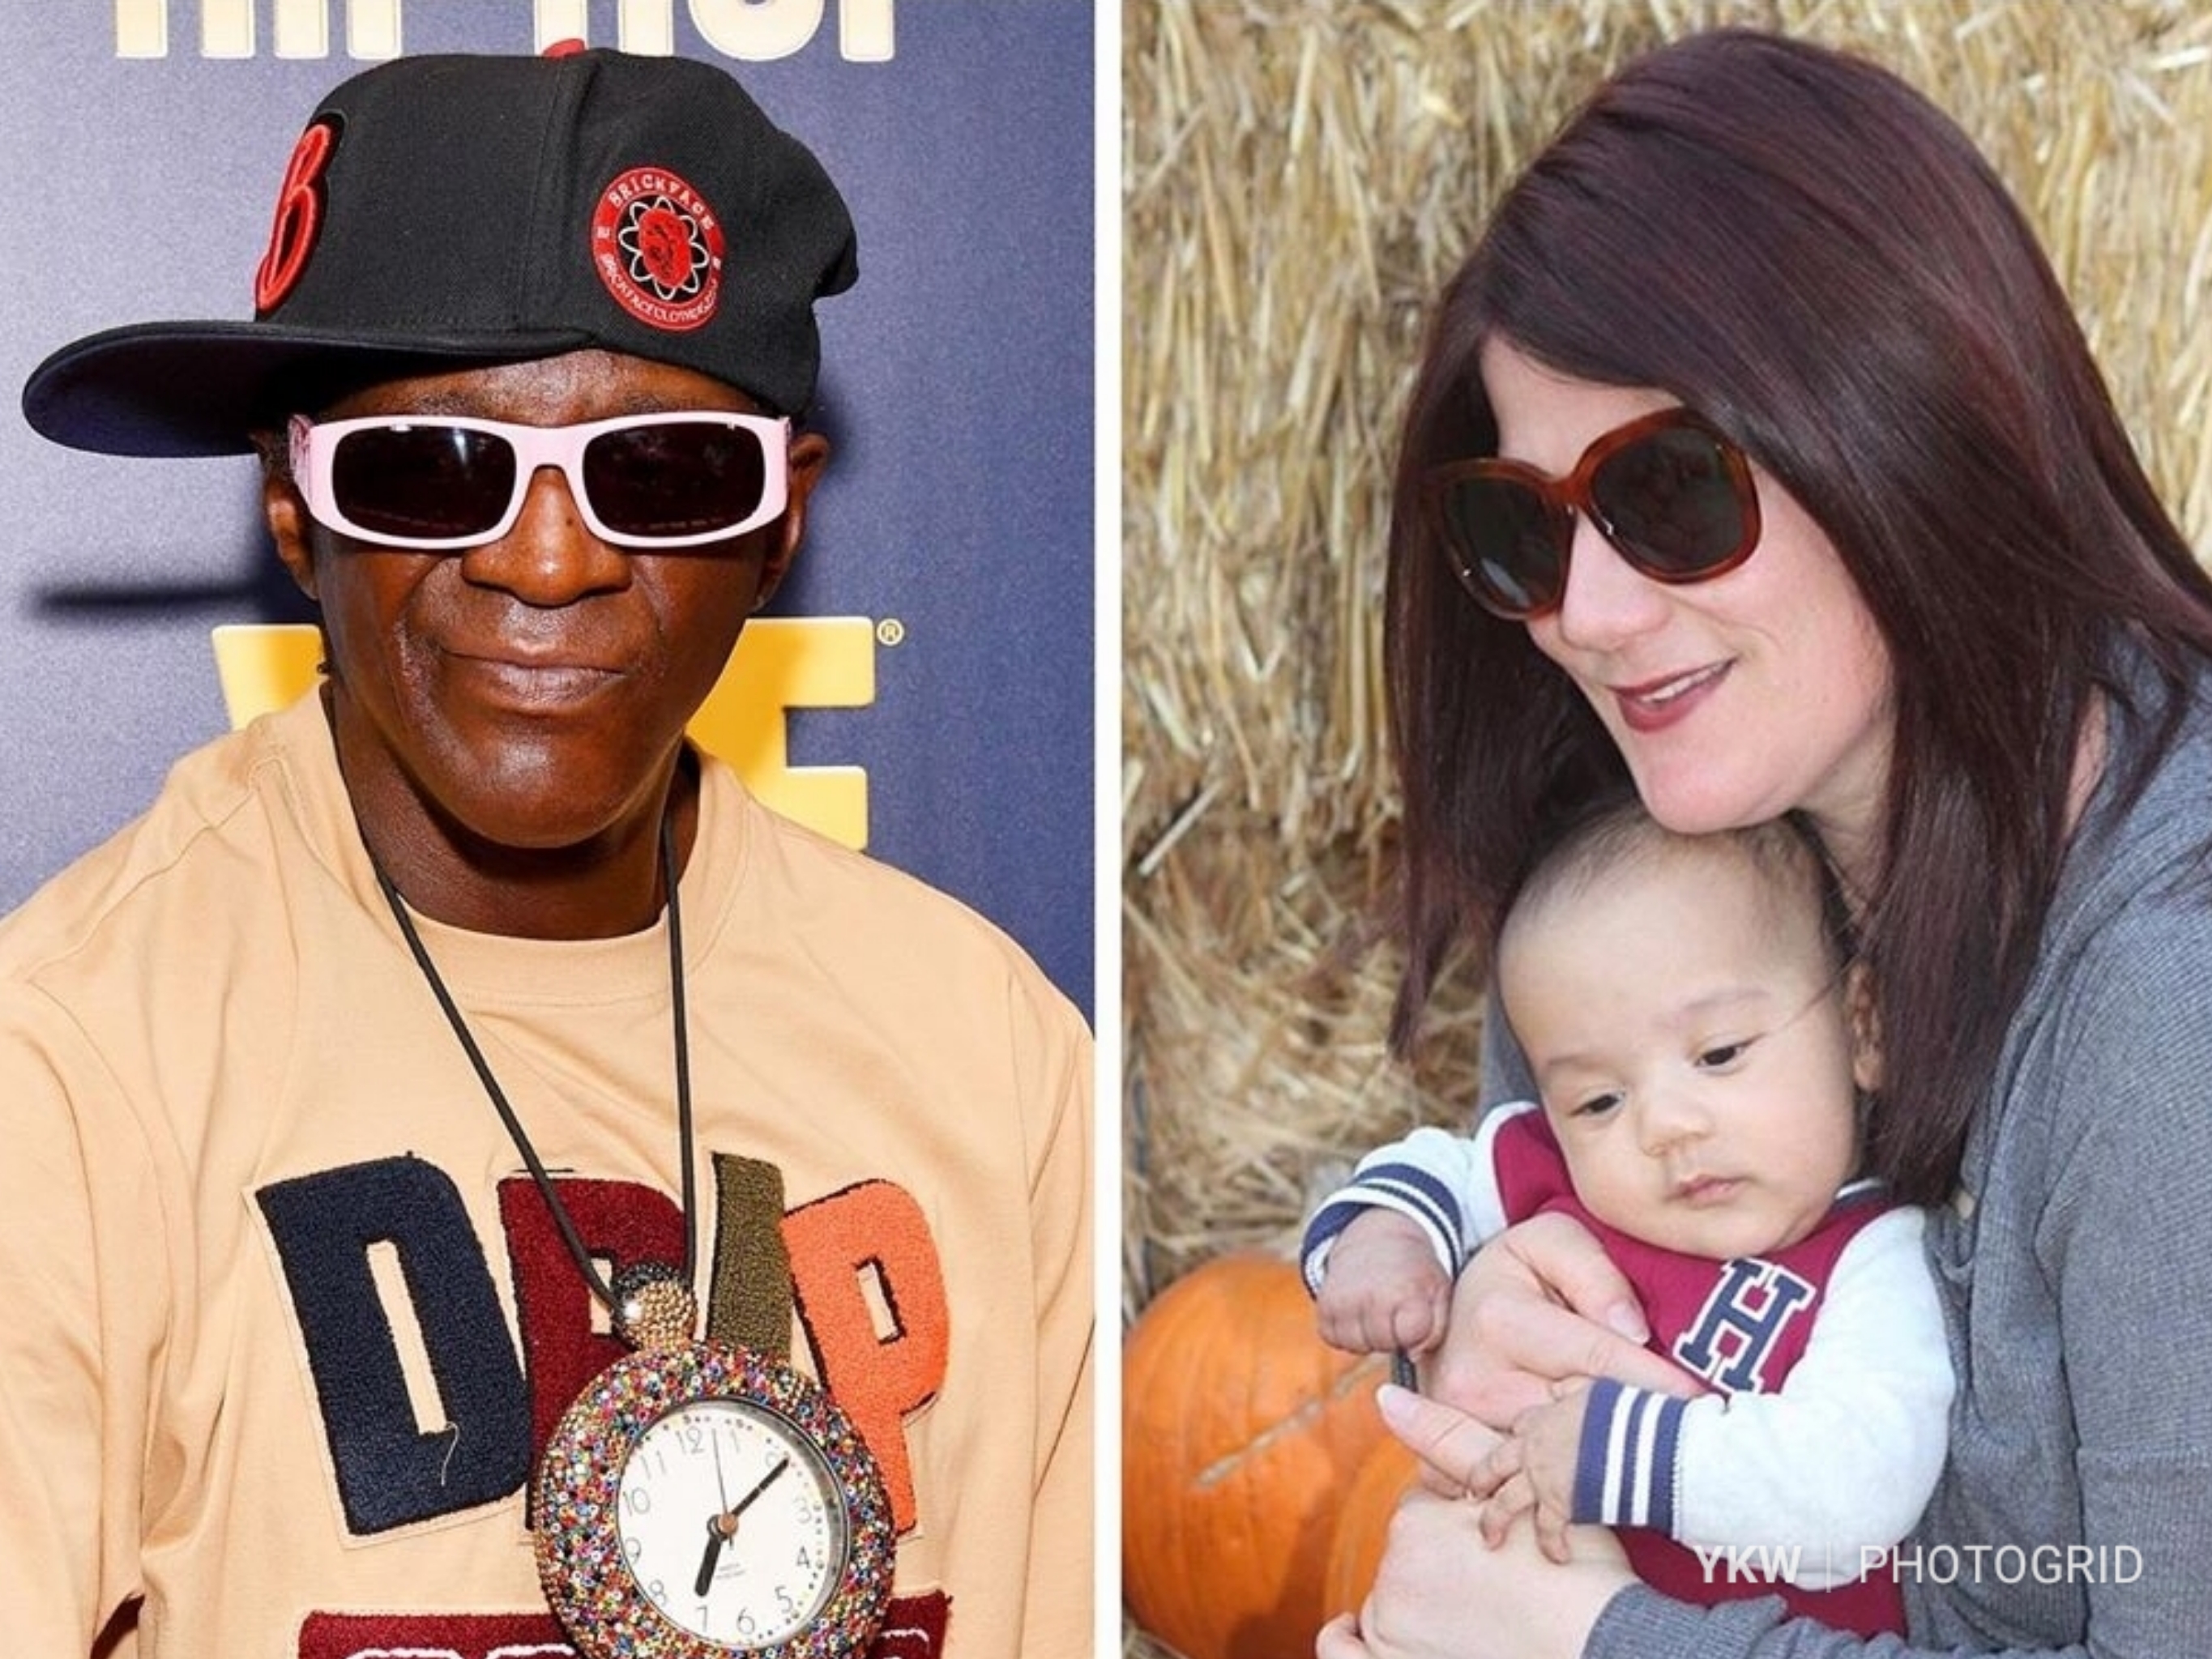 Flavor Flav, You ARE The Father! Paternity Test Proves He Has a 2-Month Old Son At 60